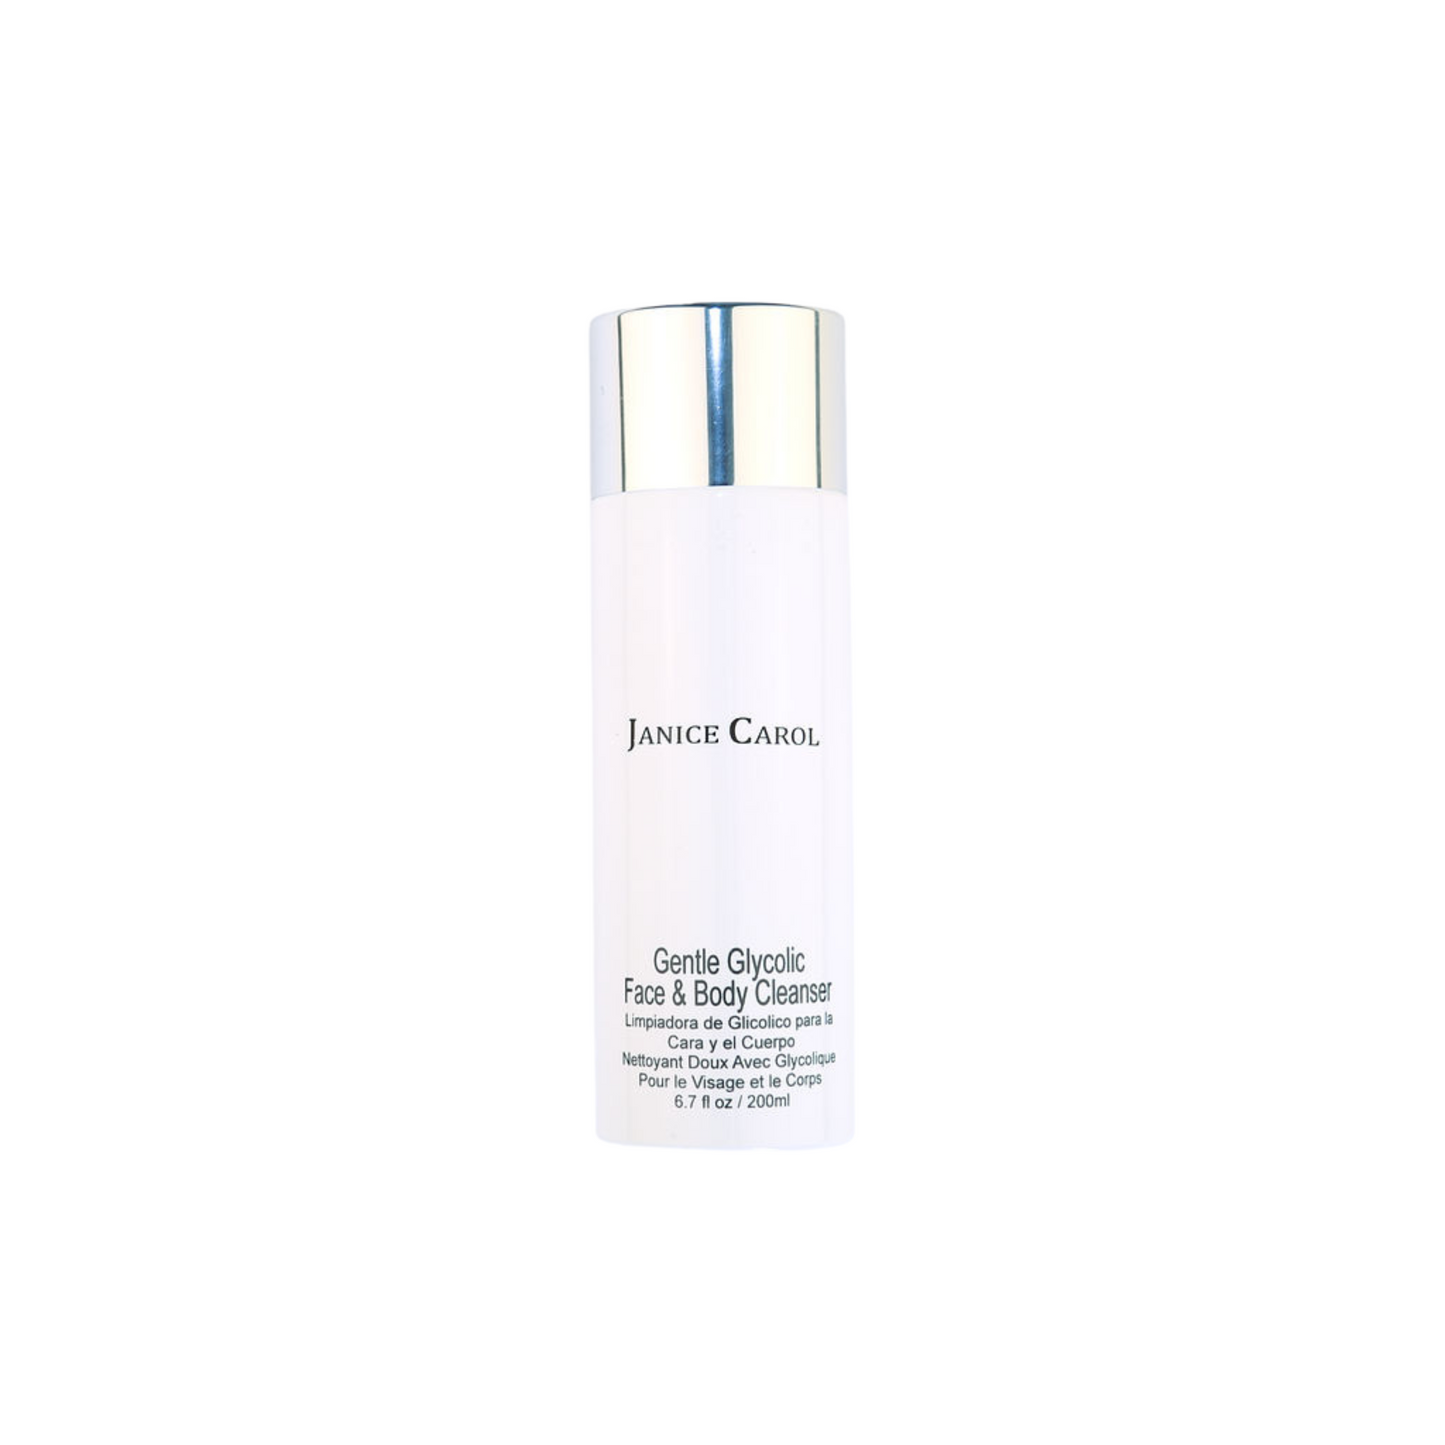 Gentle Glycolic Face and Body Cleanser